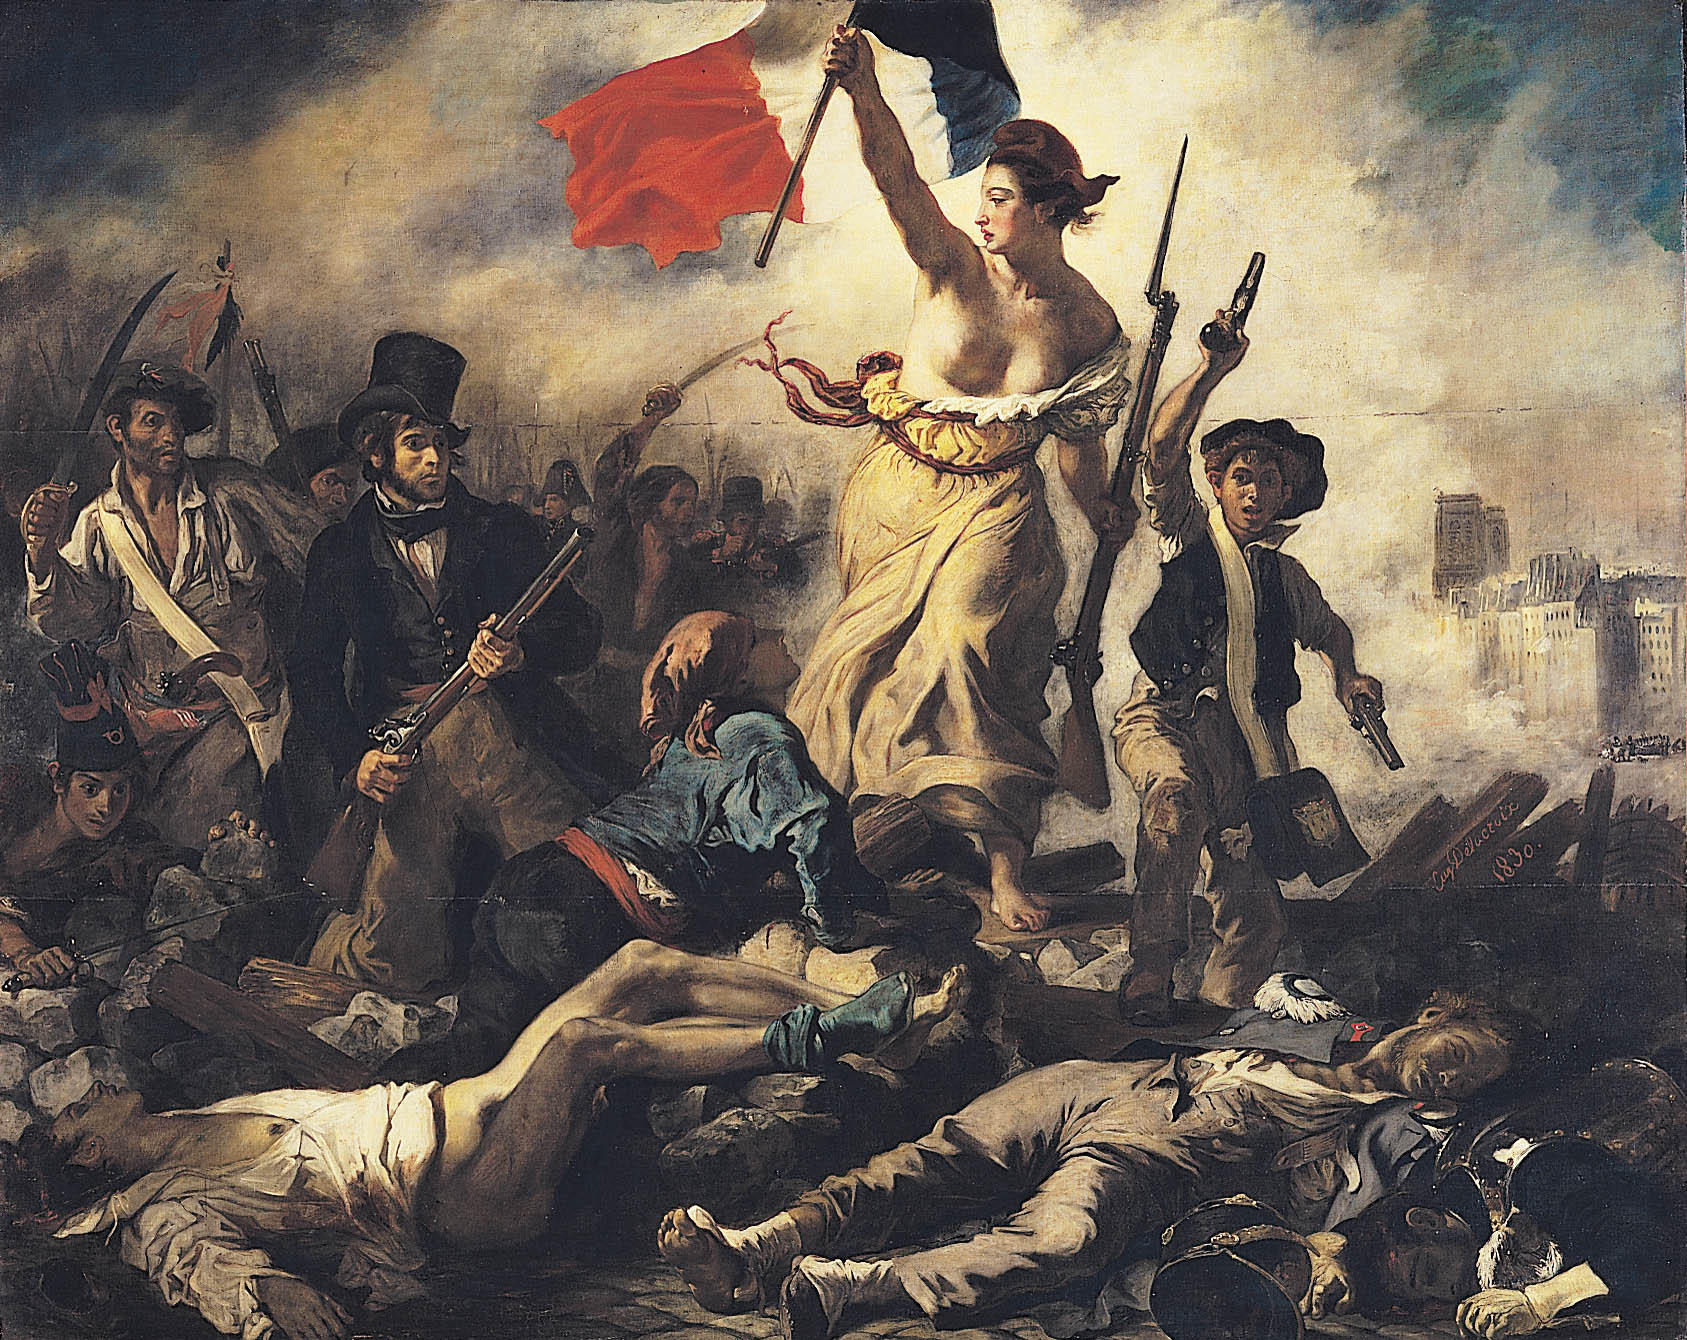 Image Eugene Delacroix - Liberty Leading the People -French revolution